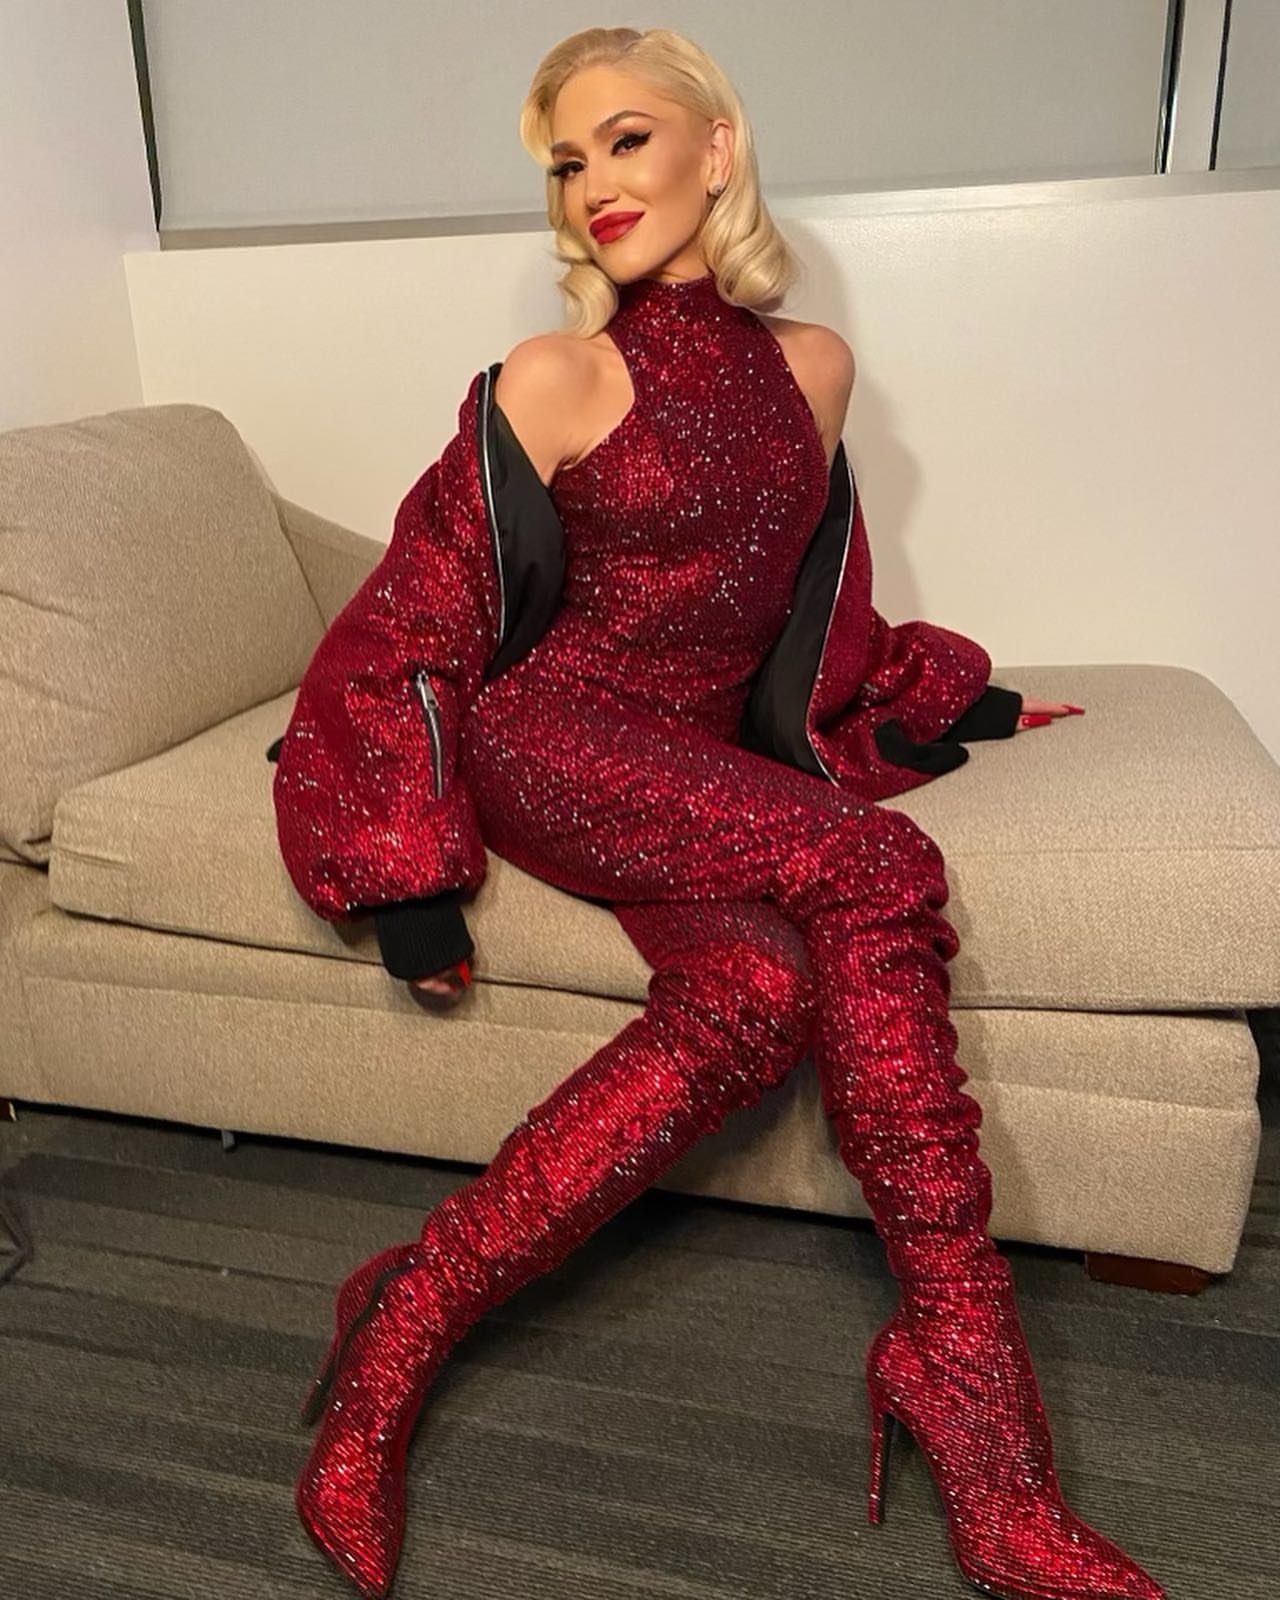 Gwen Stefani is Here for Christmas! - Photo 2